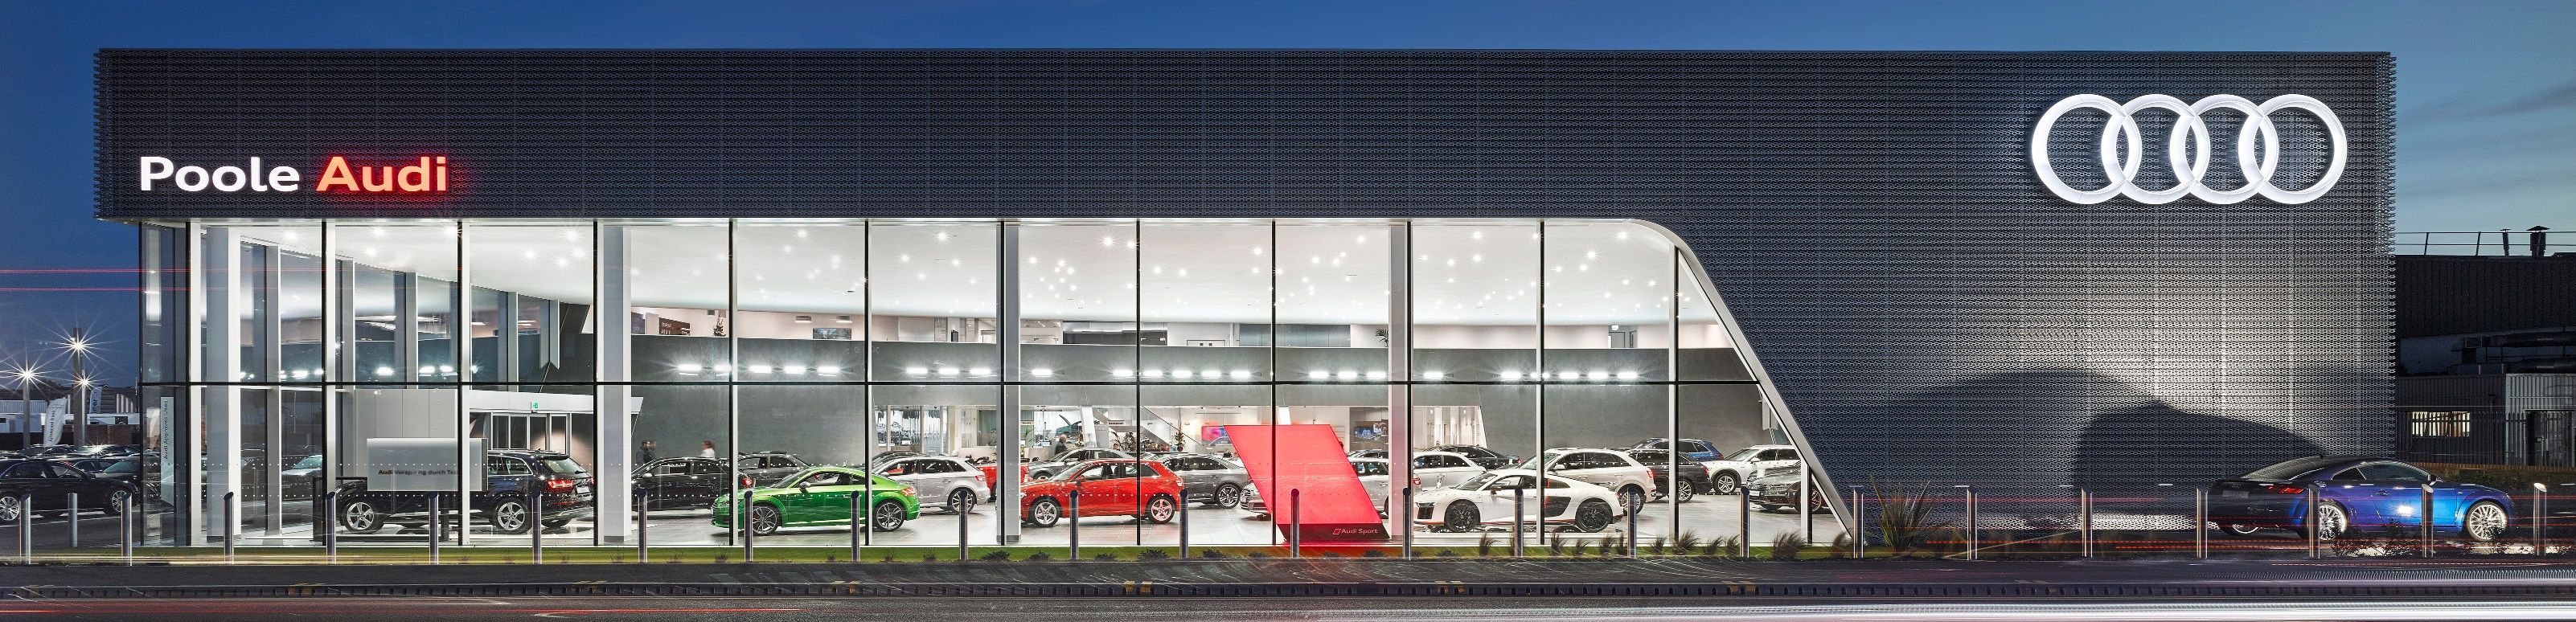 Business Vehicle Offers at Poole Audi